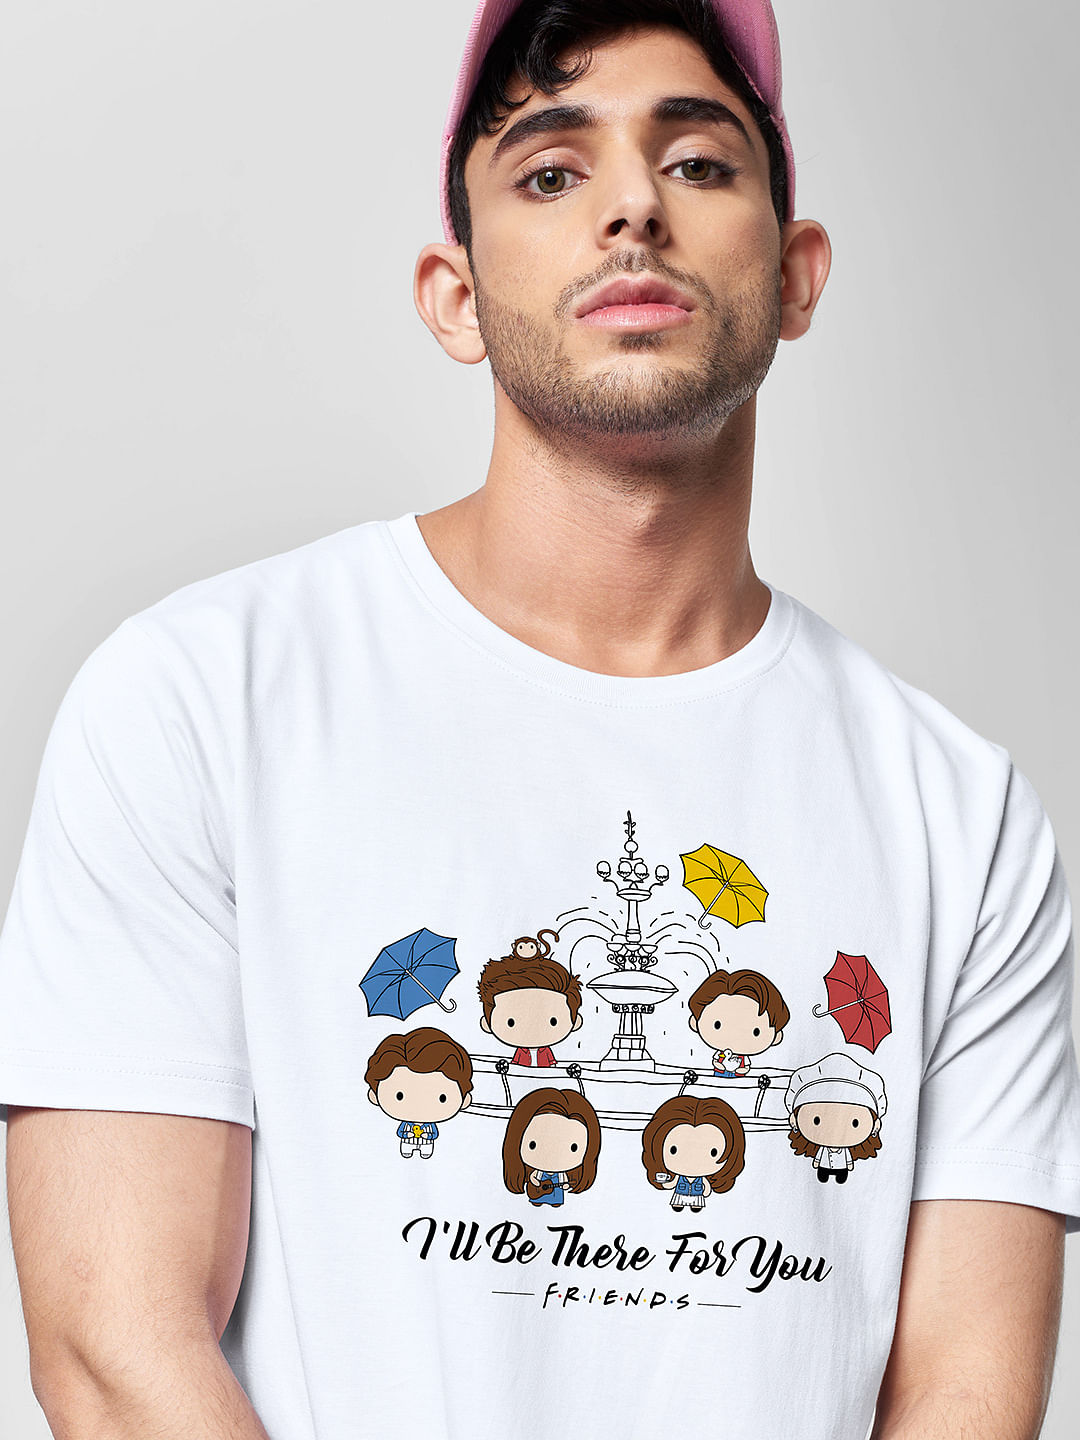 Buy Official F.R.I.E.N.D.S Merchandise - Buy Friends T-Shirts and ...